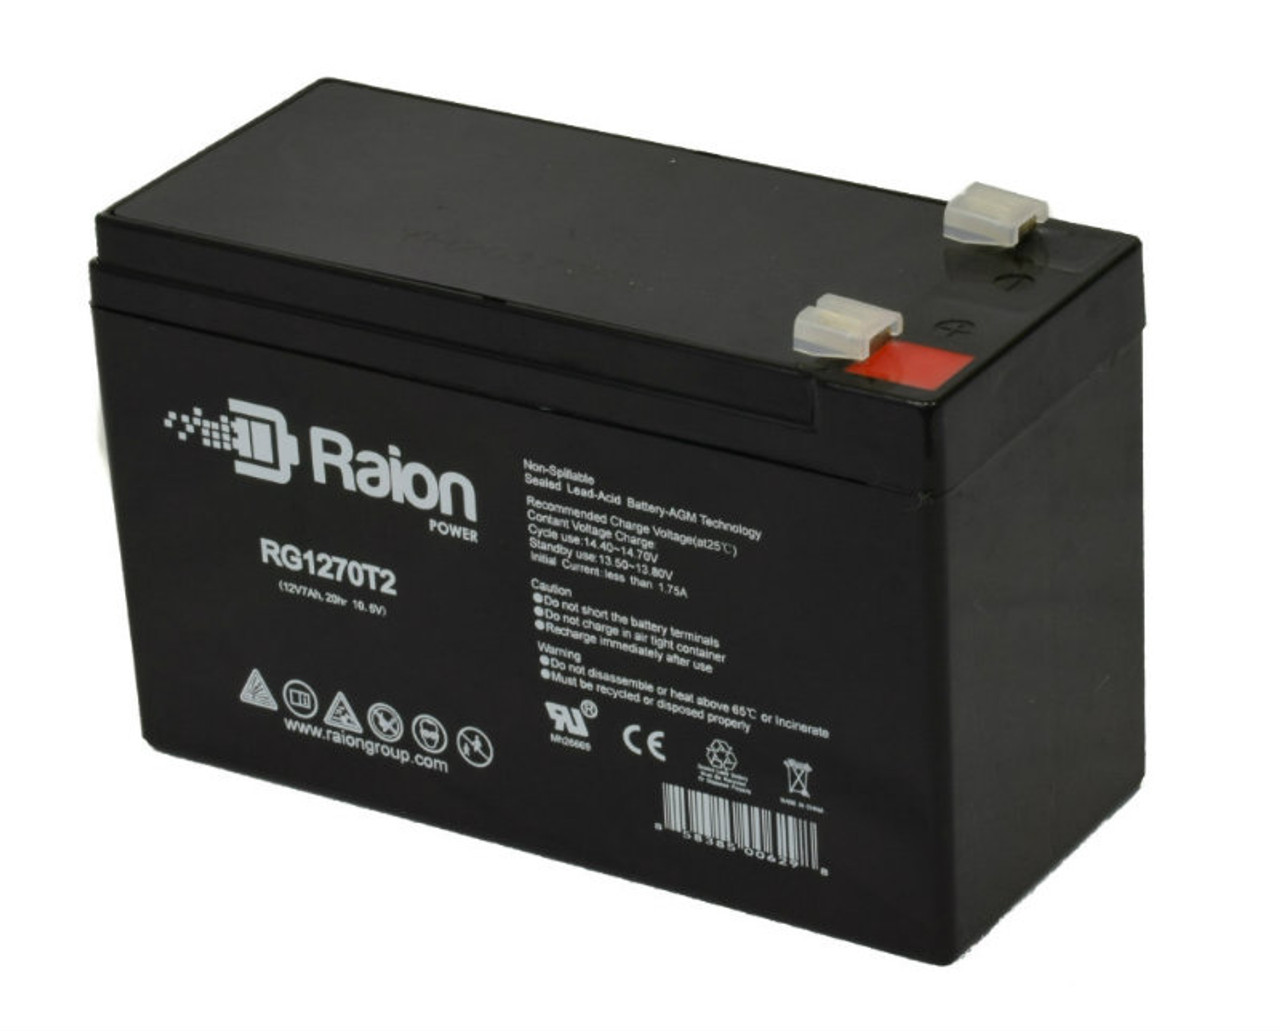 Raion Power RG1270T1 12V 7Ah Non-Spillable Replacement Battery for VCELL 12VC7.2